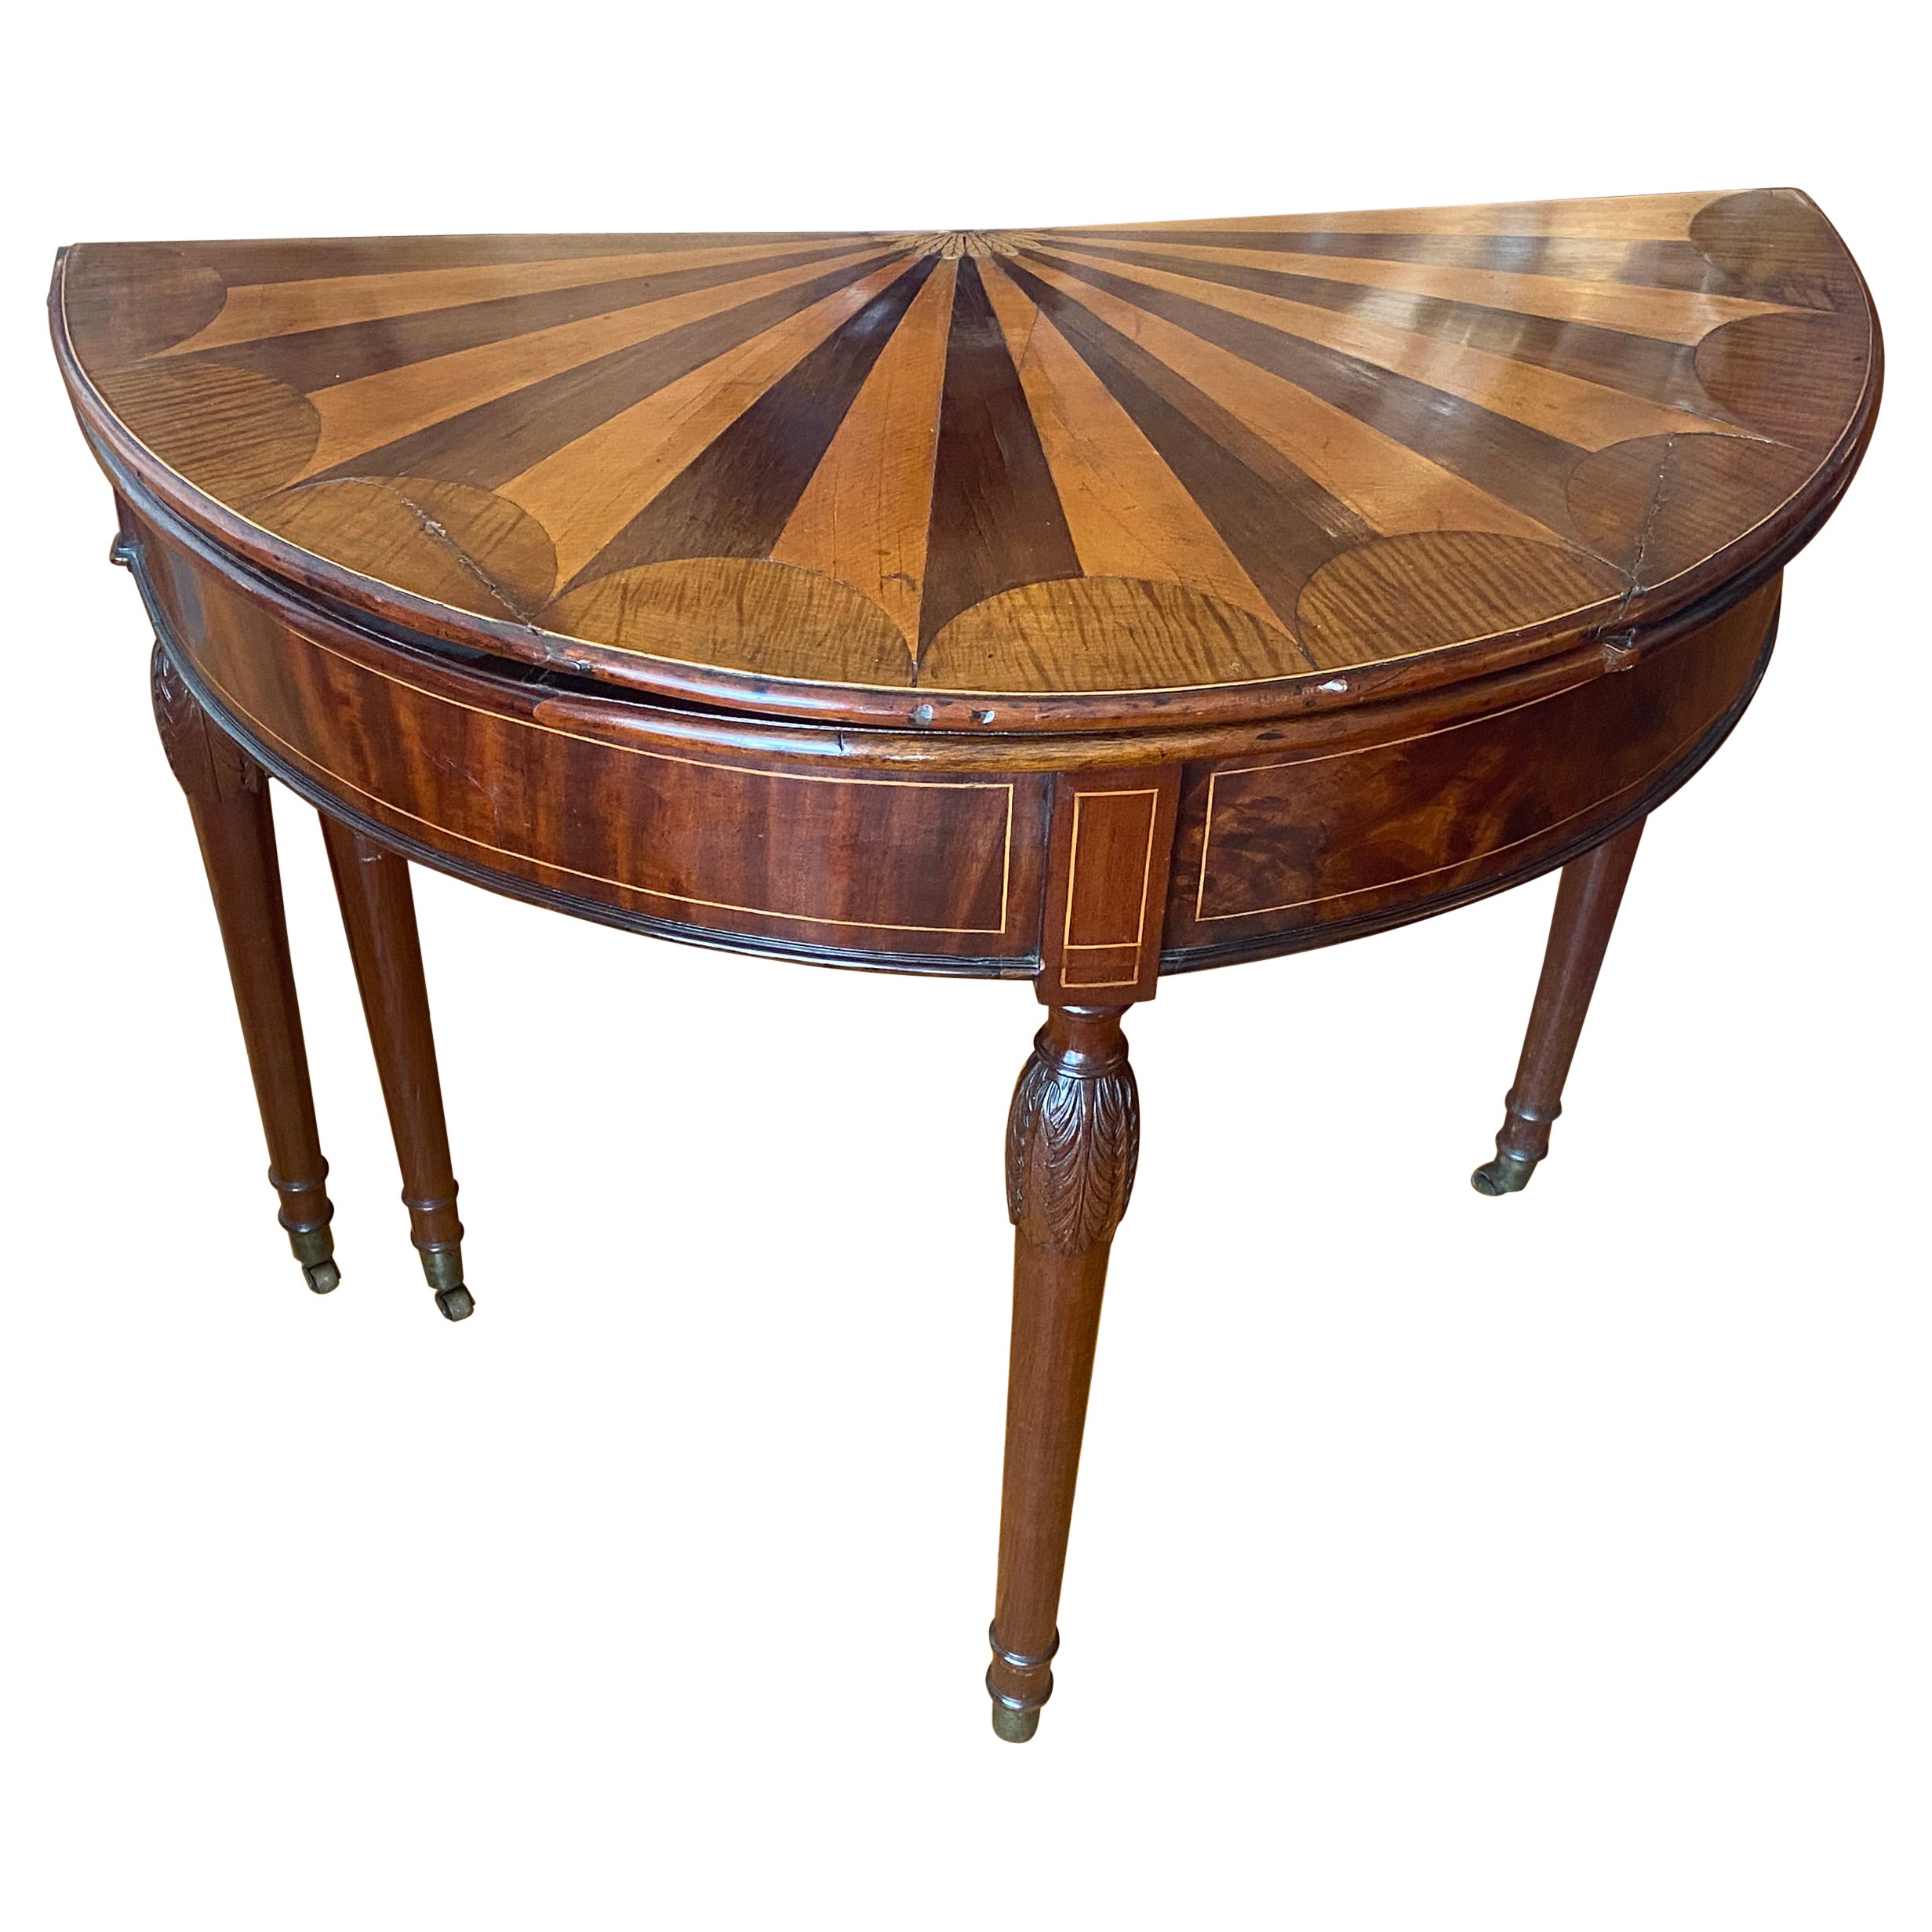 A George III fan shaped, specimen wood, inlaid demilune flip top card table.